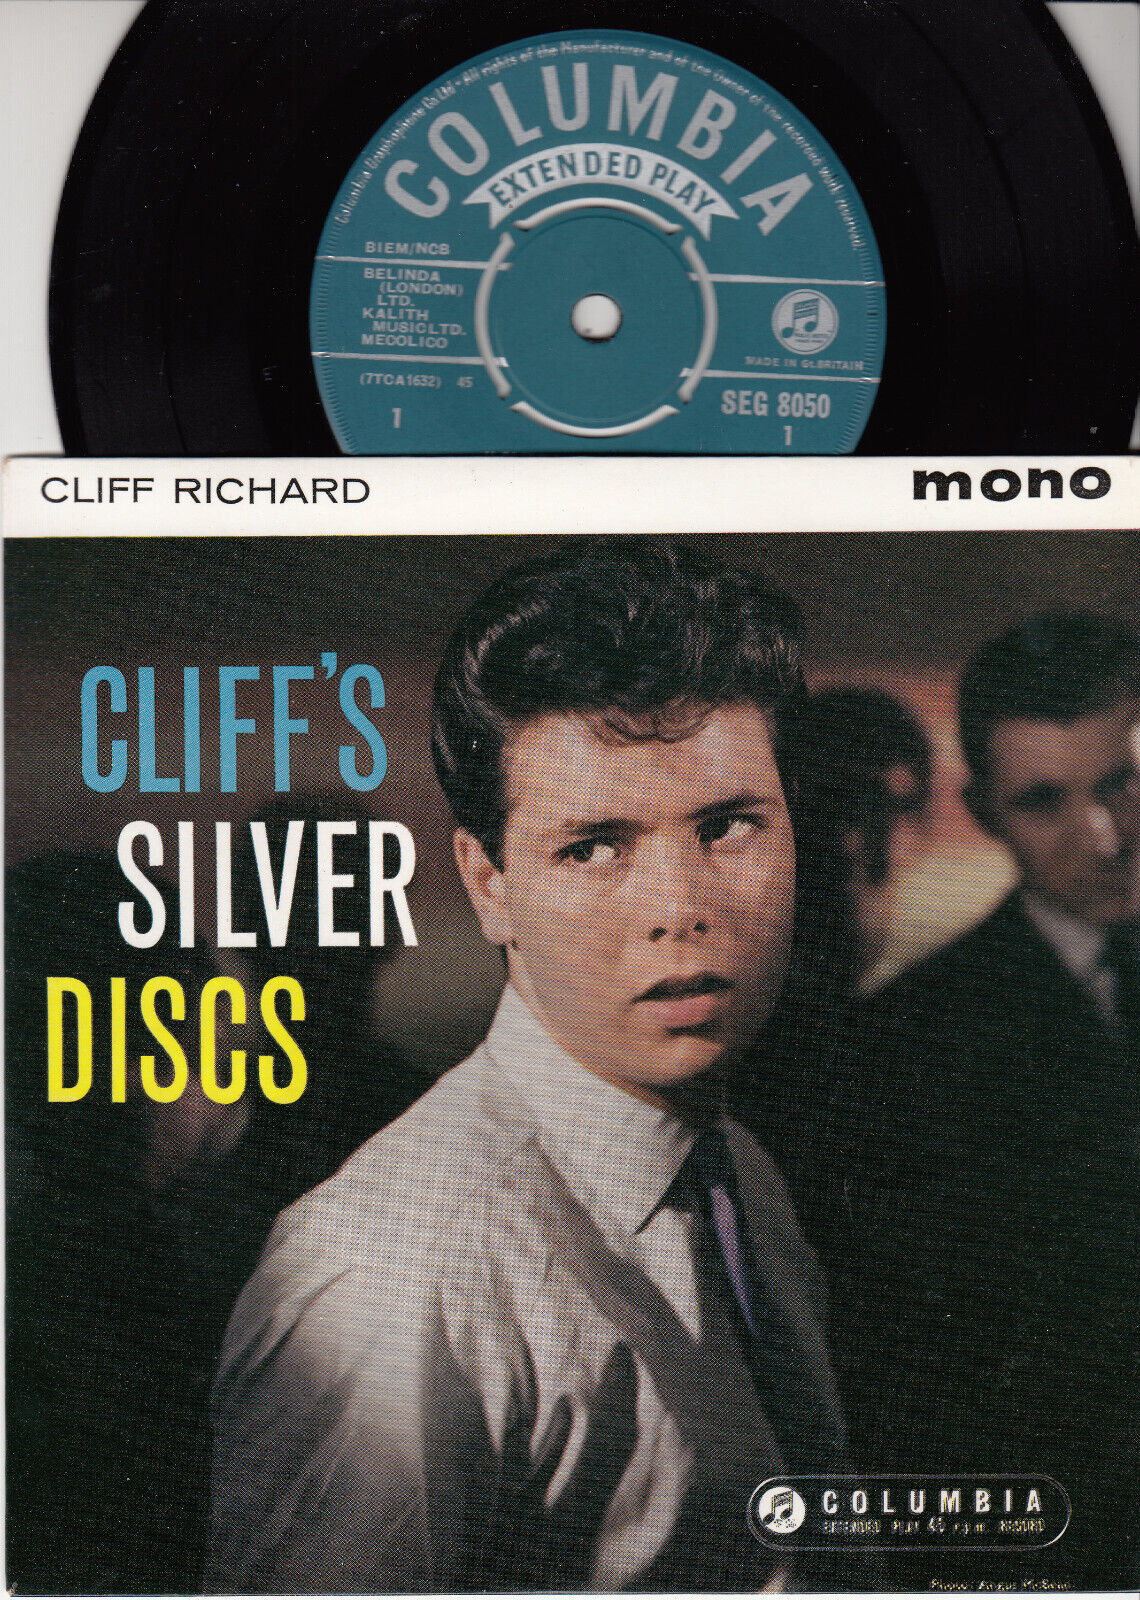 CLIFF RICHARD & SHADOWS *CLIFF'S SILVER DISCS* 1960 UK 1st ISSUE TURQUOISE EP